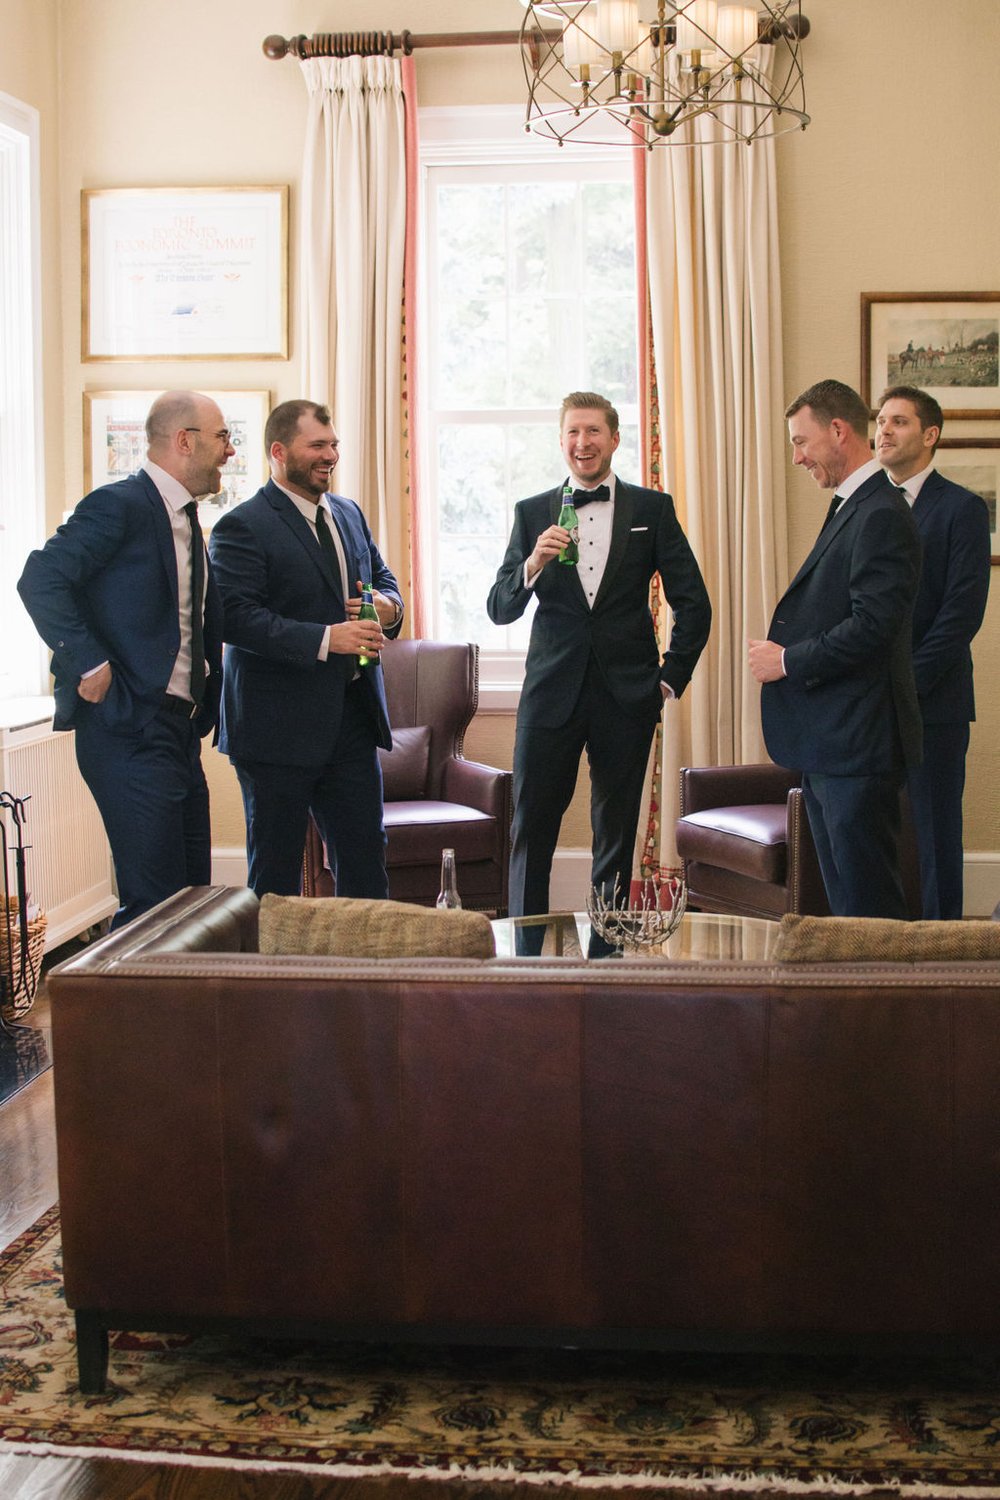 Joyous candid moment with the groom and his groomsmen at The Toronto Hunt Club